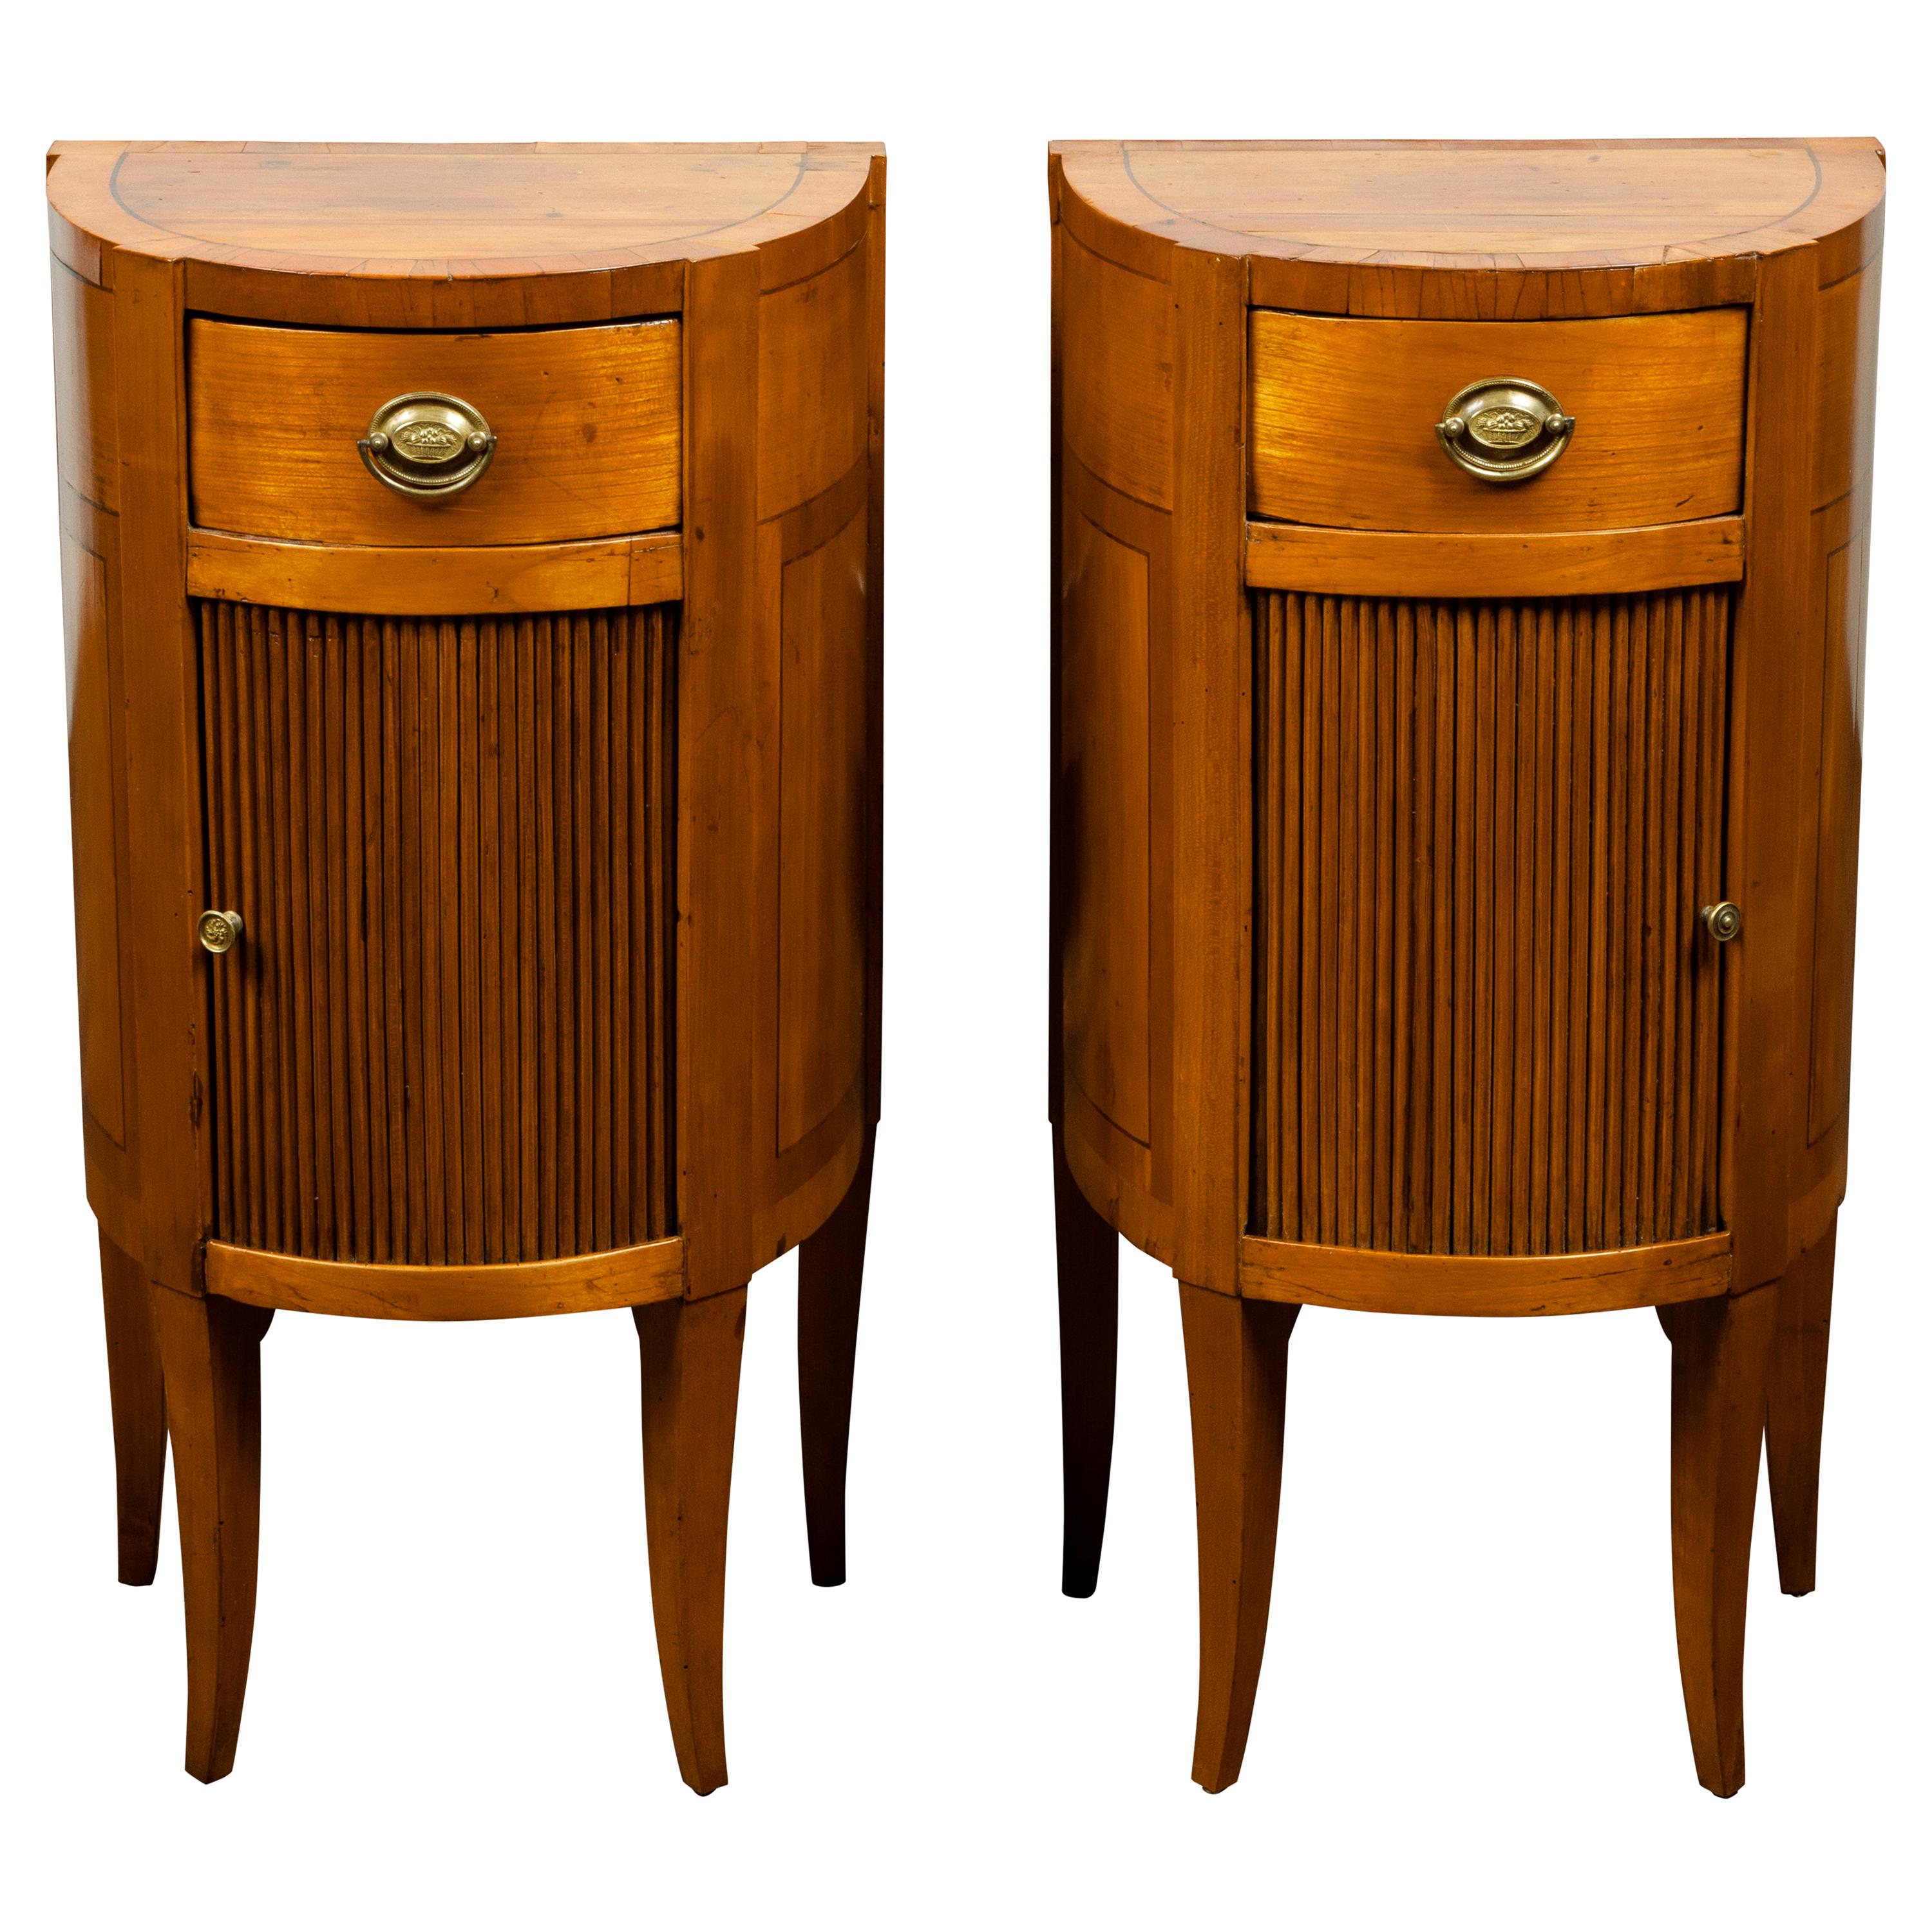 Pair of Italian 1800s Walnut Demilune Bedside Tables with Tambour Doors For Sale